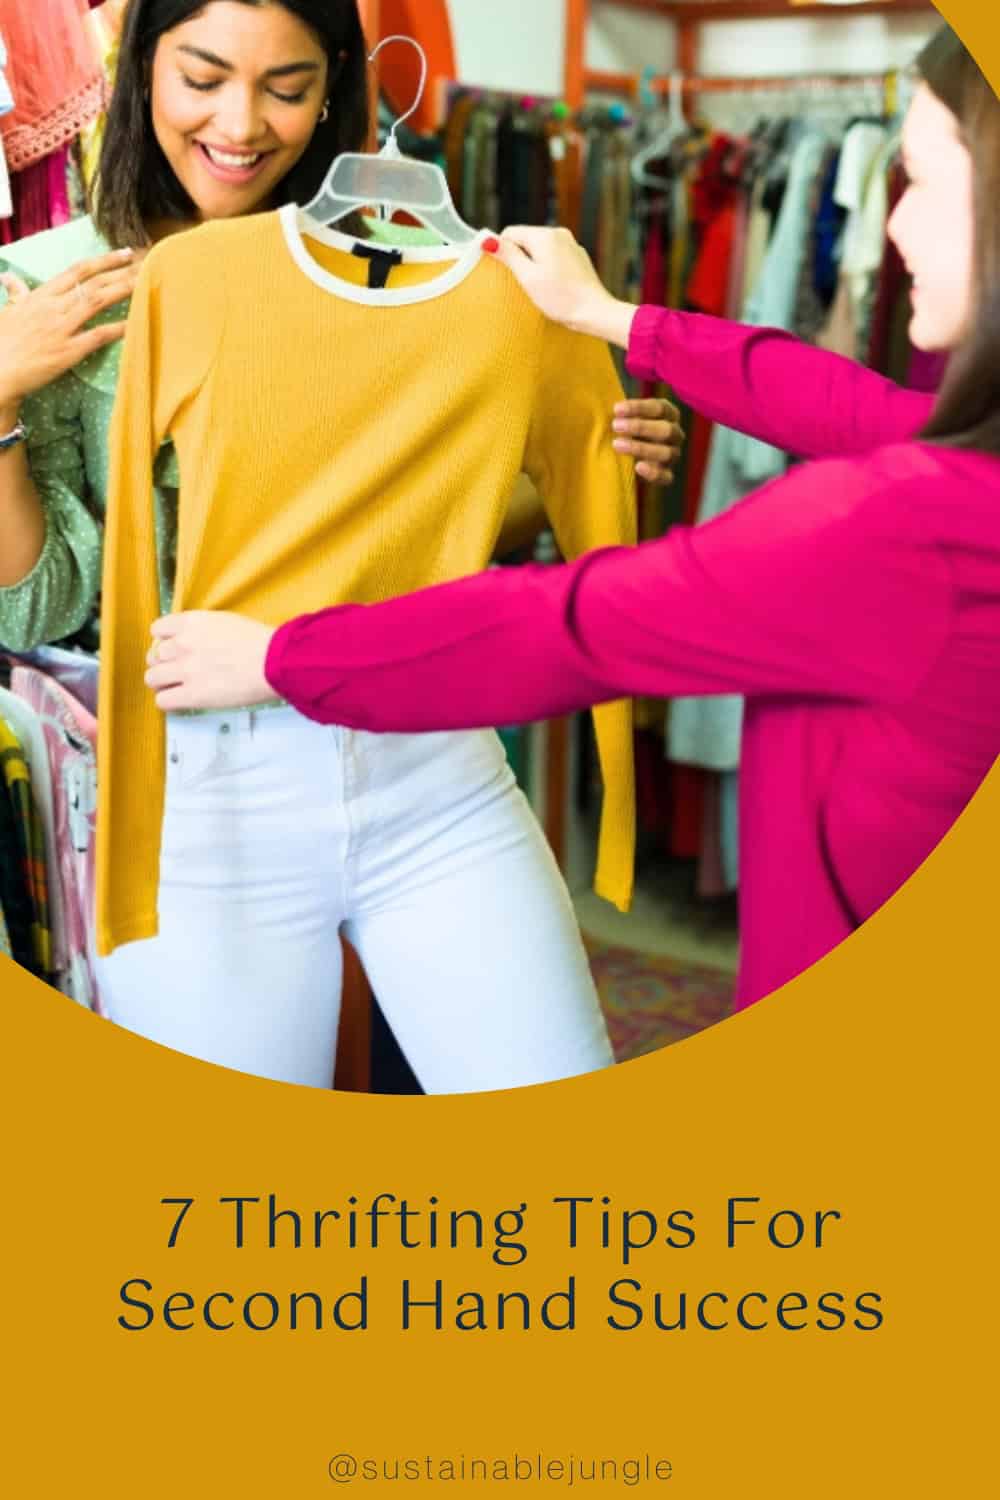 How To Thrift Shop: 7 Thrifting Tips For Second Hand SuccessImage by Antonio_Diaz#thriftingtips #thriftshoppingtips #tipsforthrifting #howtothriftshop #thrifting #sustainablejungle